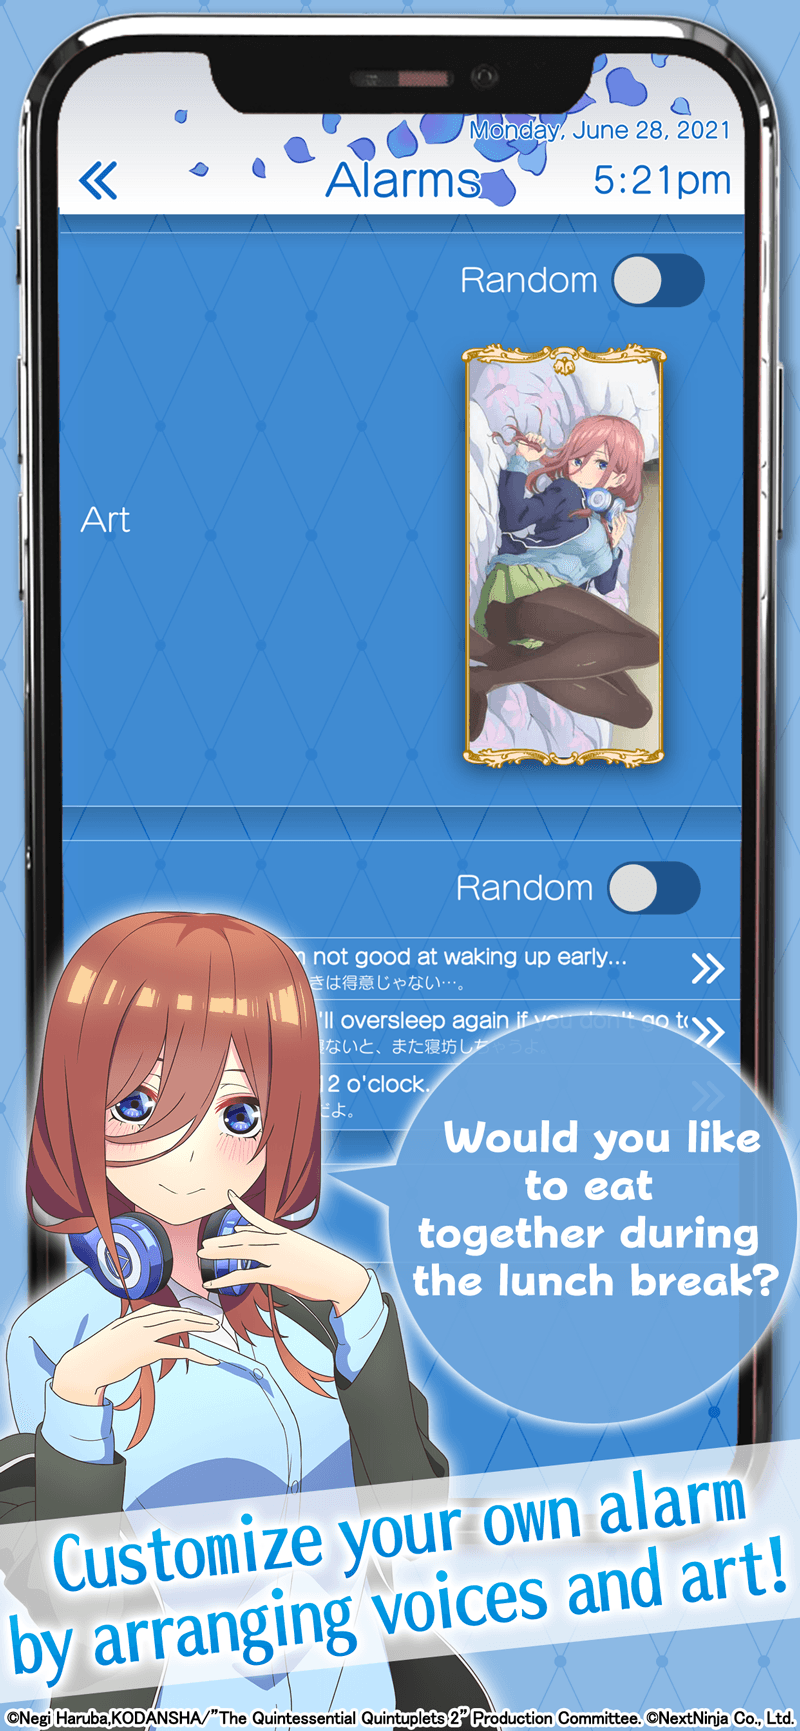 Would you like to eat together during lunch break? Customize your own alarm by arranging voices and art!